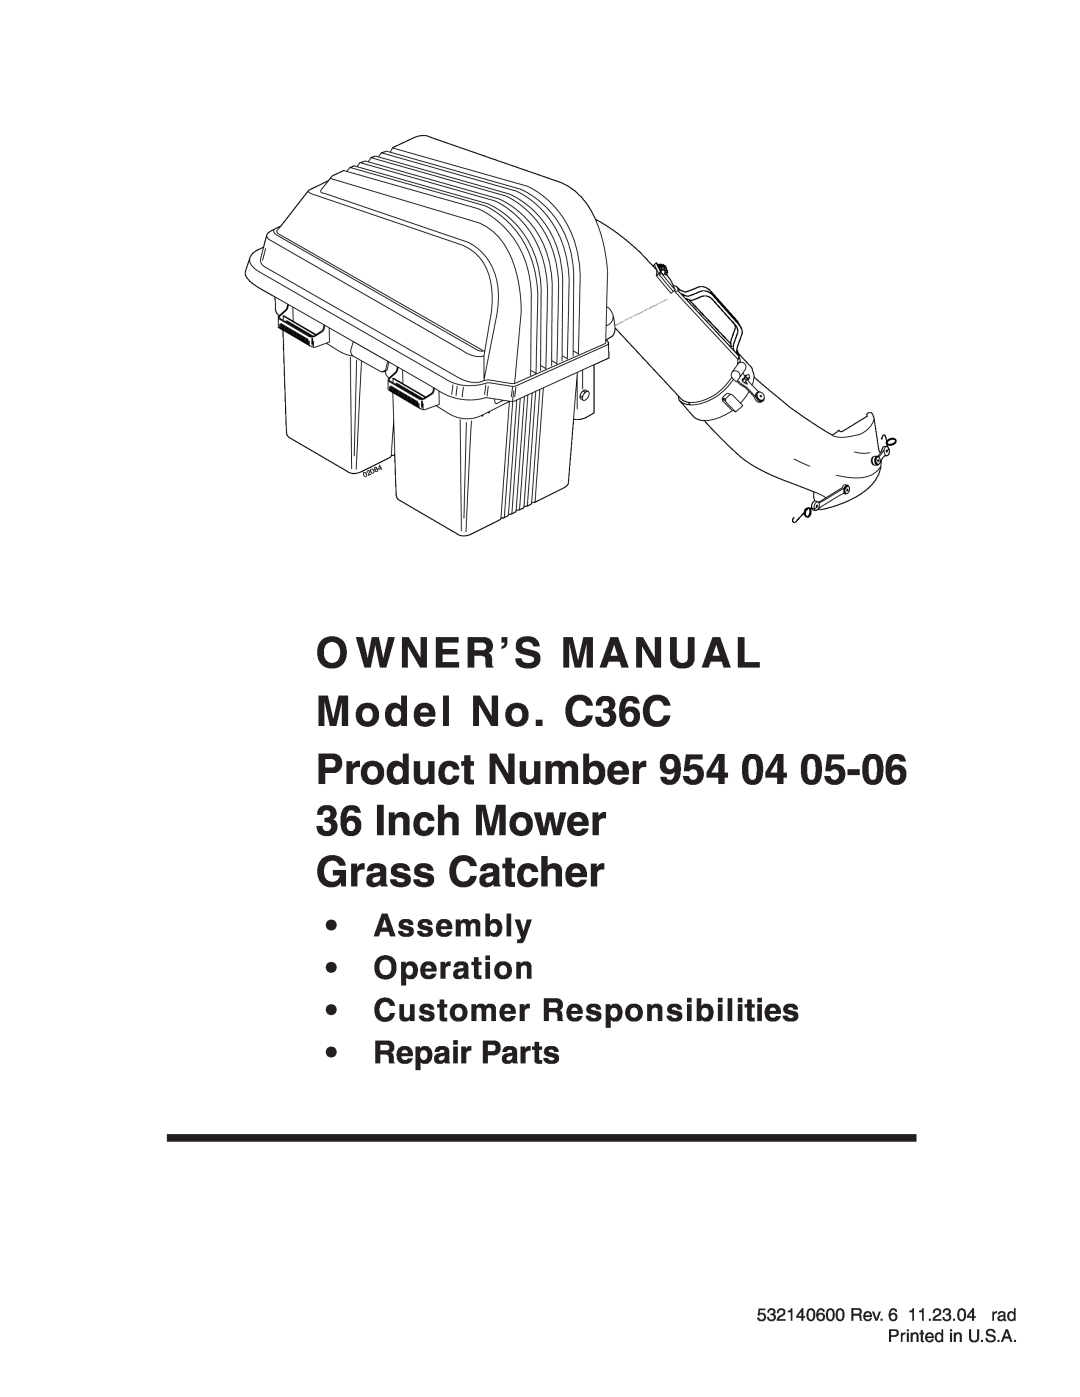 Poulan 532140600 owner manual O WNER’S MANUAL Model No. C36C Product Number 954 04 36 Inch Mower, Grass Catcher 